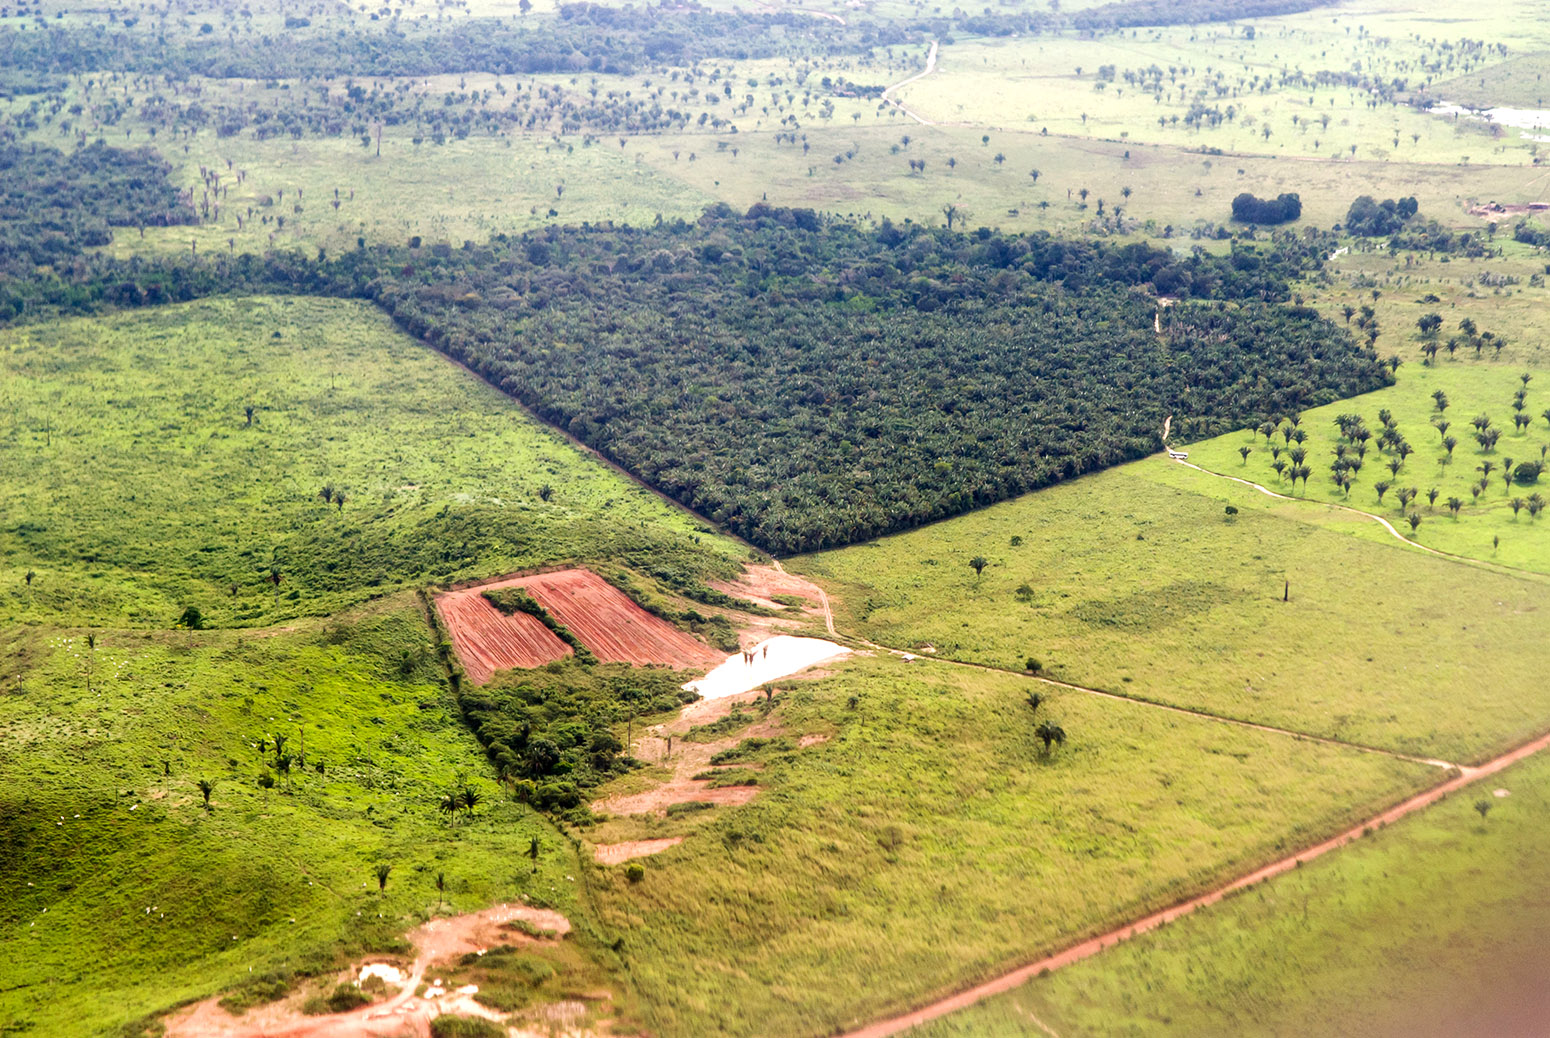 Aerial view of deforestation in the Amazon rainforest, near Belém, Brazil. Credit: Sue Cunningham Photographic / Alamy Stock Photo. E01WJH